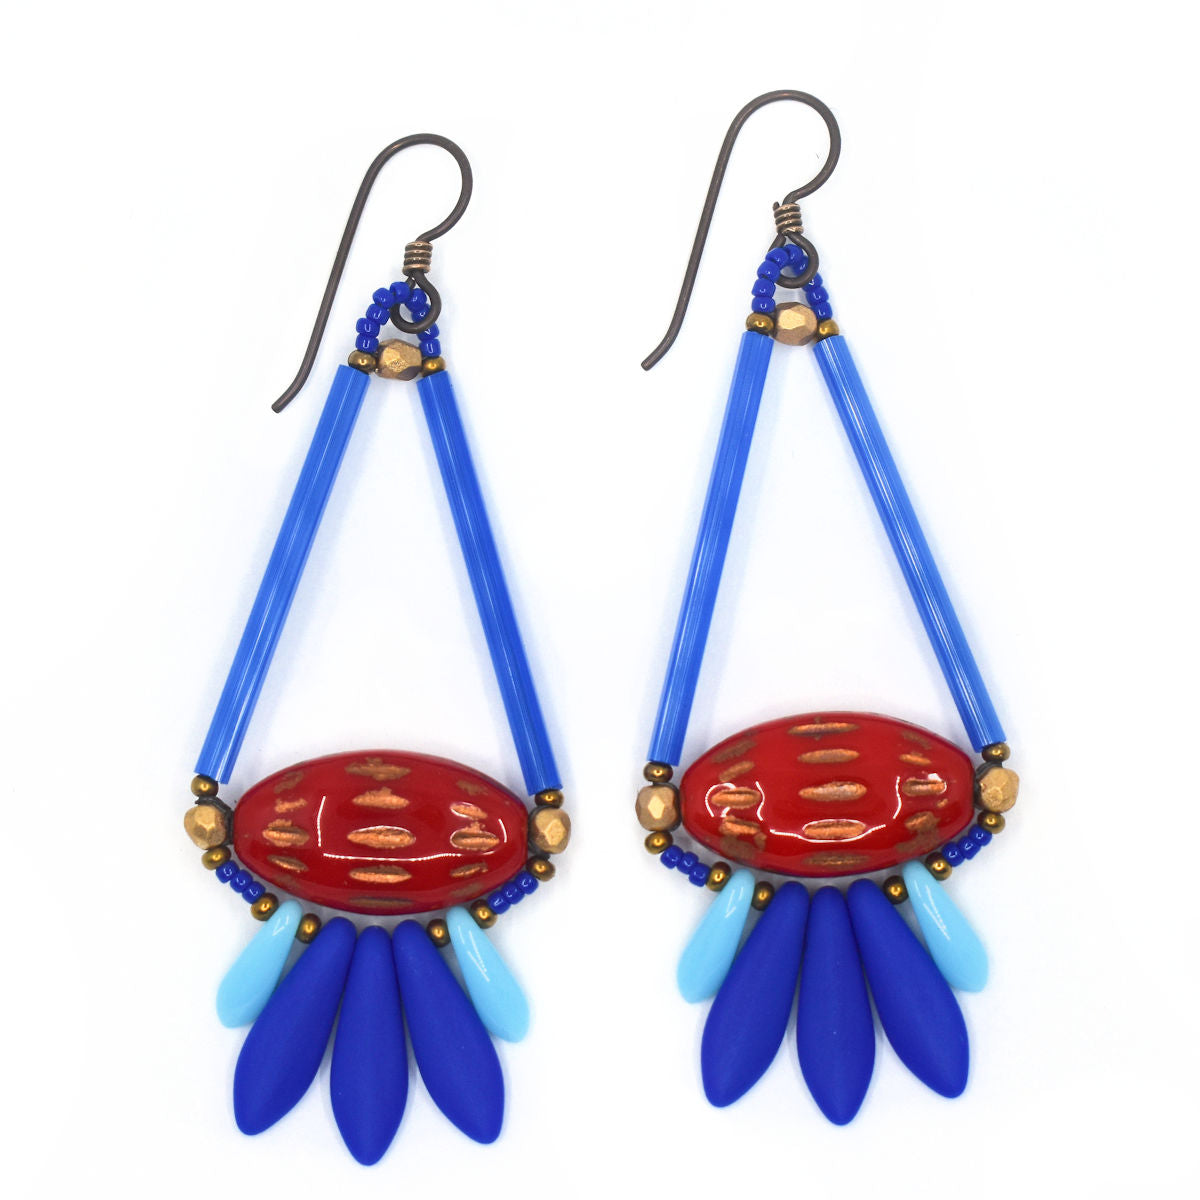 Long blue and red earrings shaped like a teardrop with tail feathers lay on a white background. The upper part of the teardrop shape is formed by long medium blue tubes. At the base is a glossy red pointed oval with copper horizontal dashes. At the bottom is a spray of dagger shaped beads, the center three are matte medium blue and the outer two are shiny and light blue. The earrings have dark ear wires.